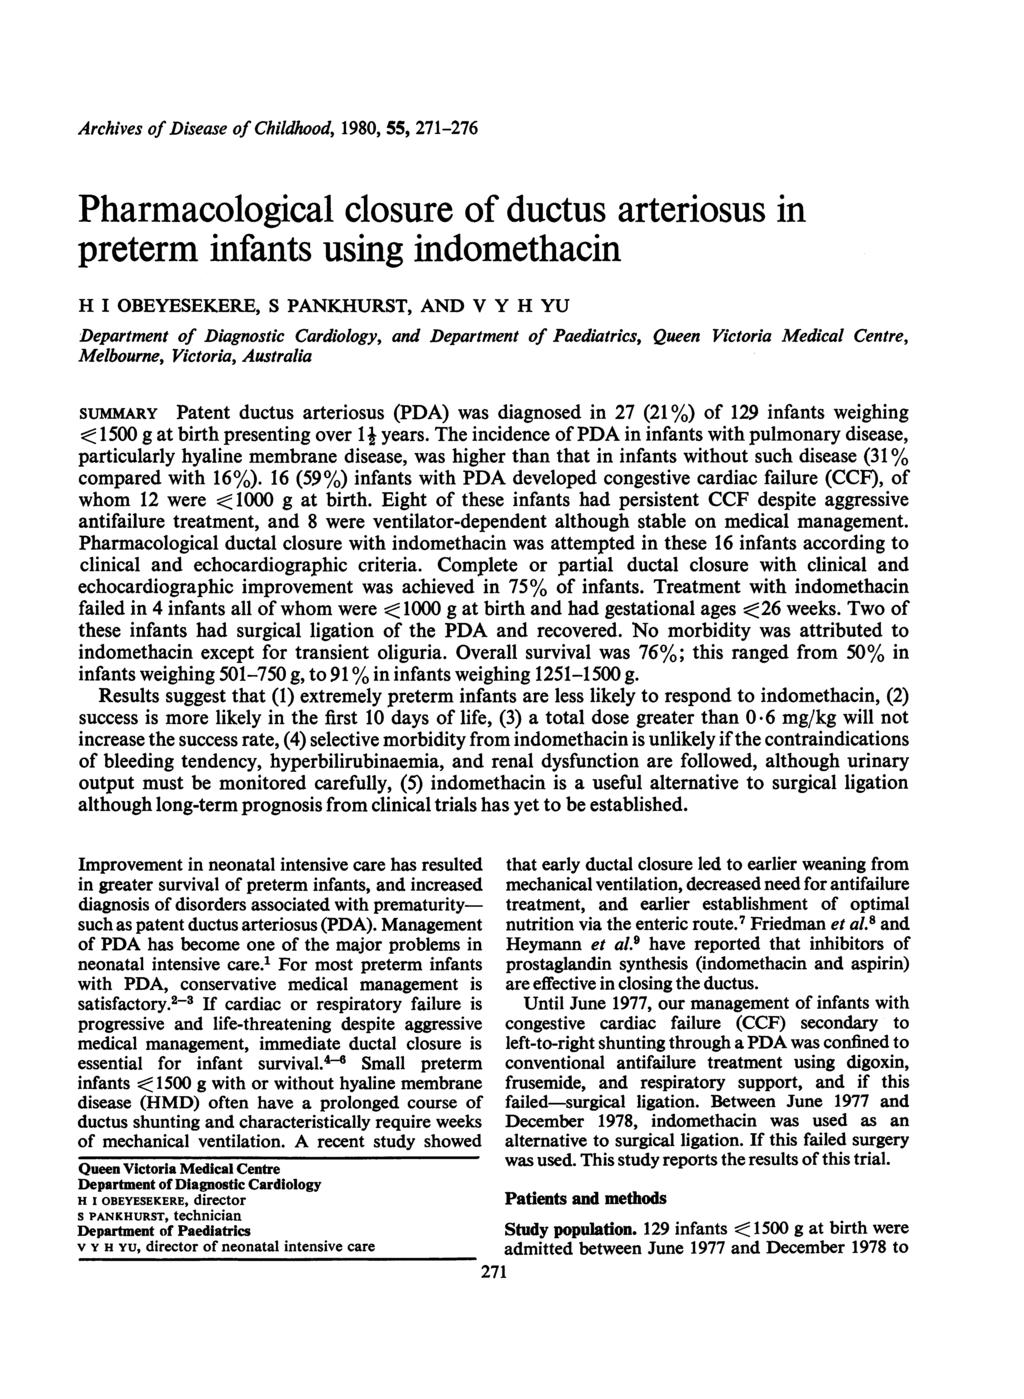 Archives of Disease of Childhood, 198, 55, 271-276 Pharmacological closure of ductus arteriosus in preterm infants using indomethacin H I OBEYESEKERE, S PANKHURST, AND V Y H YU Department of